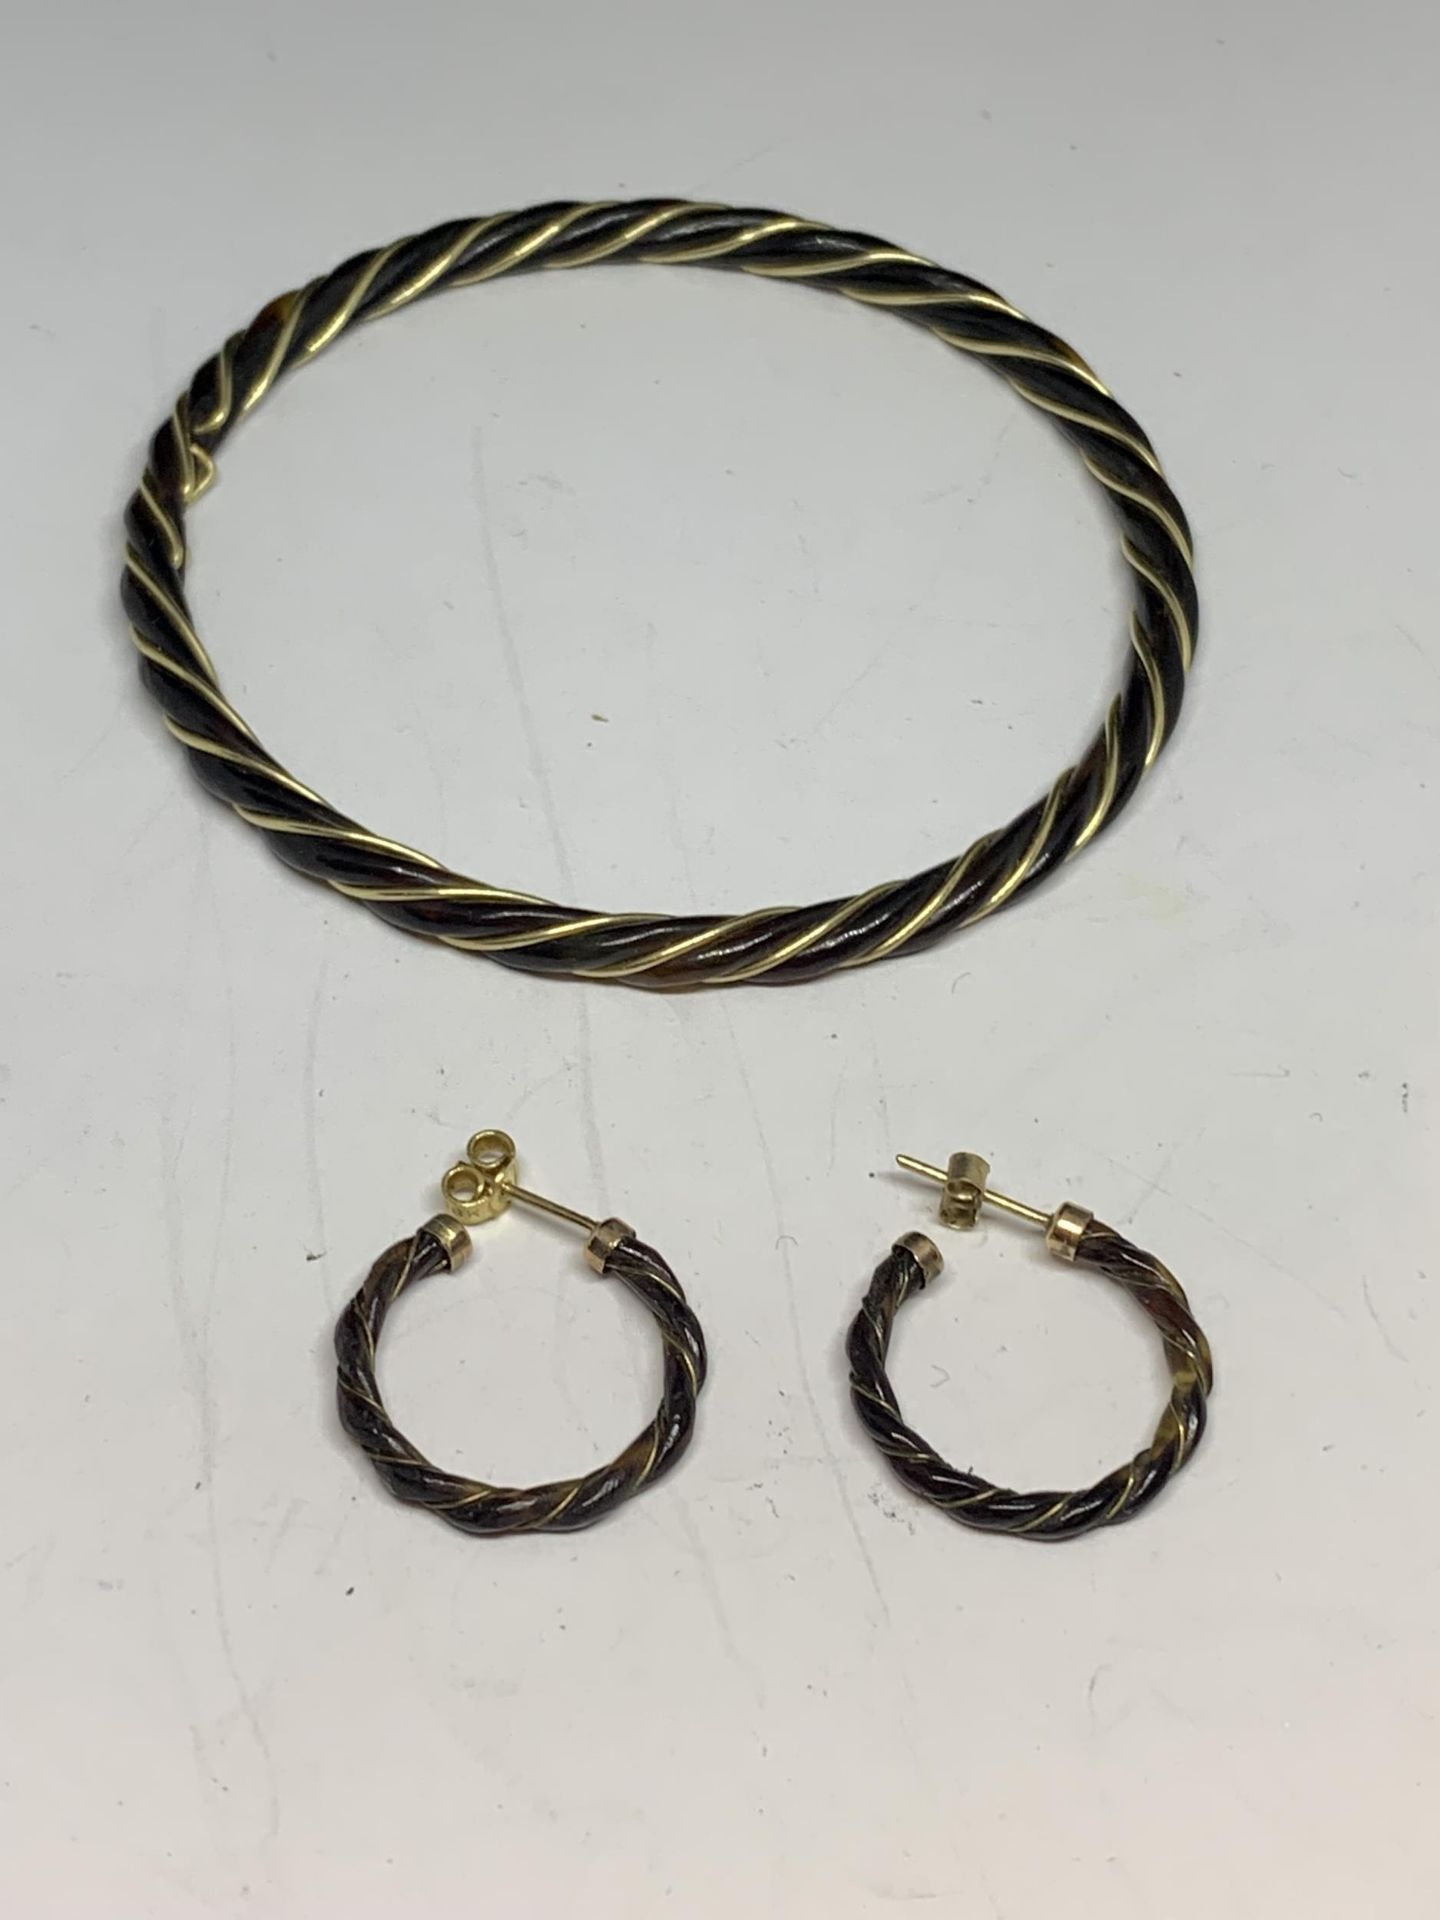 A BLACK BANGLE WITH A TESTED TO 14 CARAT GOLD WIRE TWISTED THROUGH IT AND A PAIR OF MATCHING